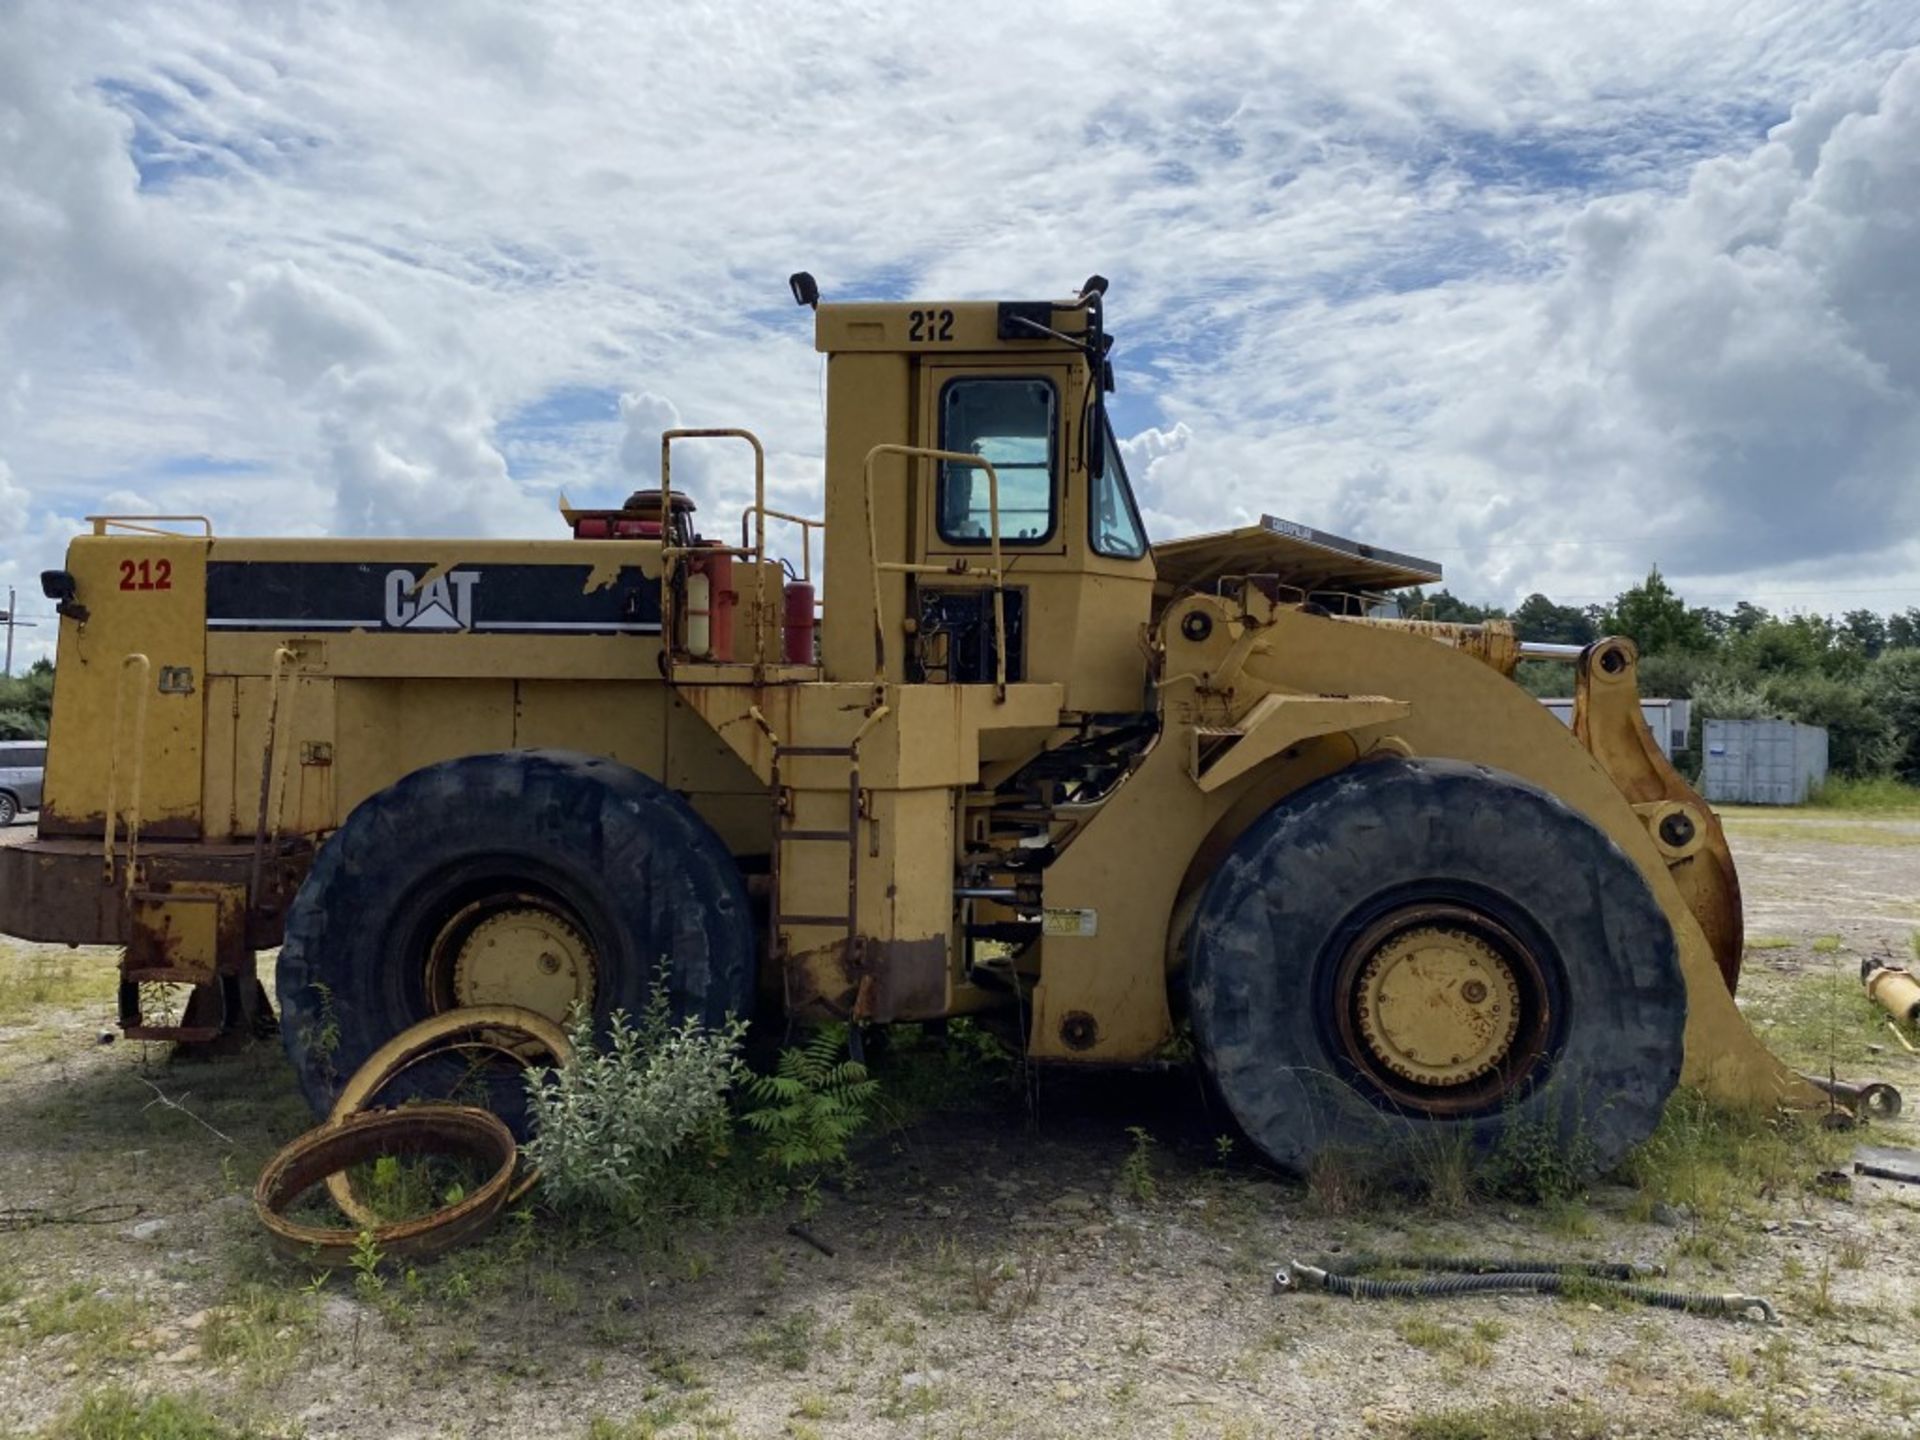 1998 CATERPILLAR 988F ARTICULATED WHEEL LOADER, ENCLOSED CAB, S/N: 8Y601152, 39,457 HOURS, PARTS - Image 3 of 18